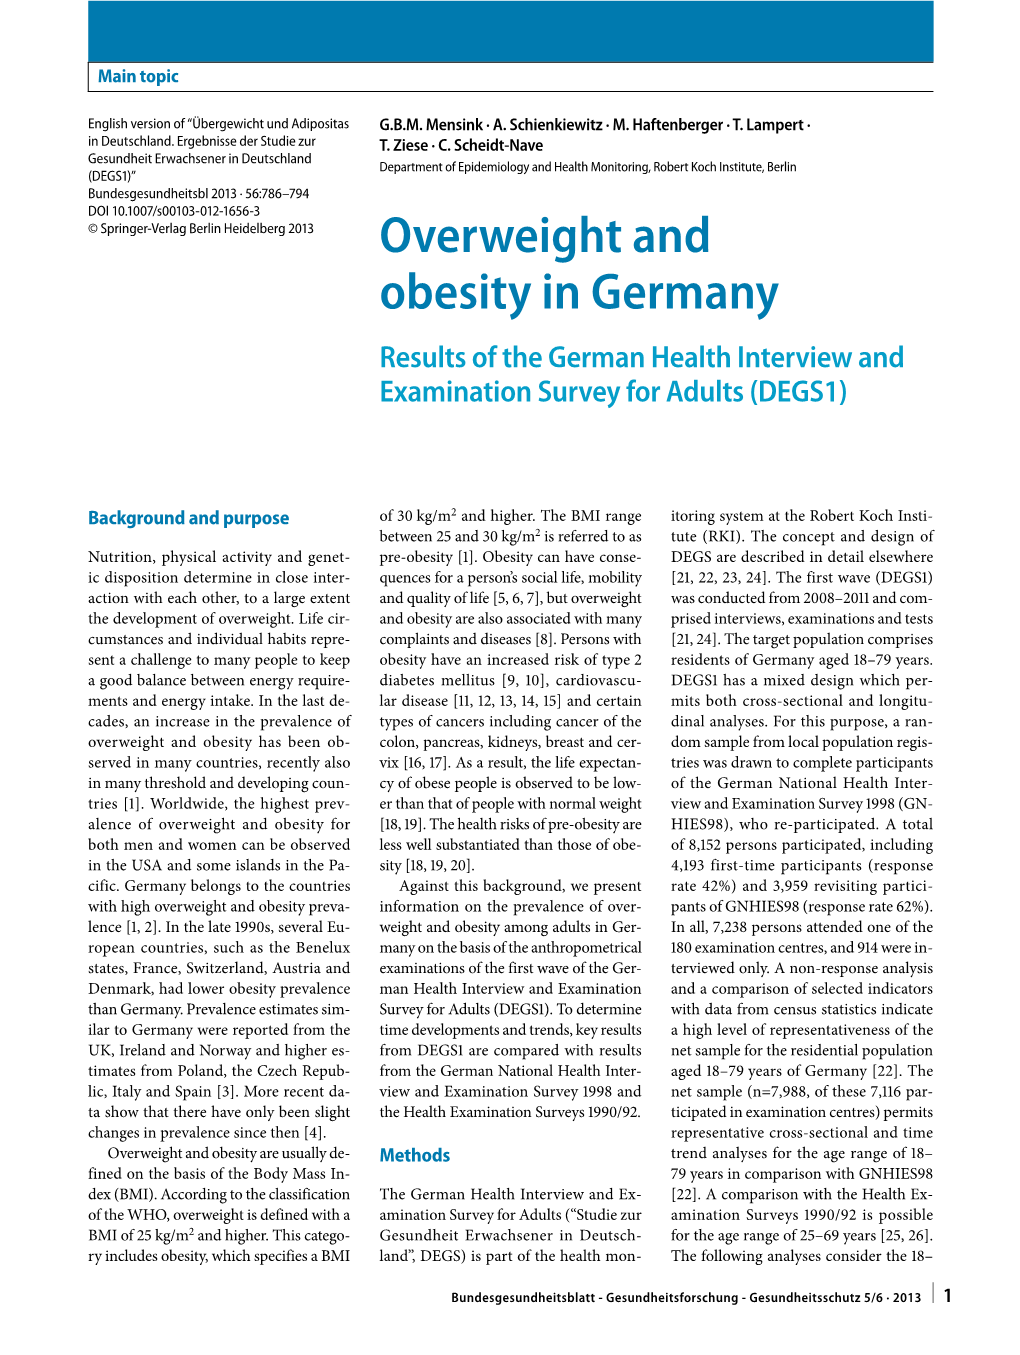 Overweight and Obesity in Germany Results of the German Health Interview and Examination Survey for Adults (DEGS1)